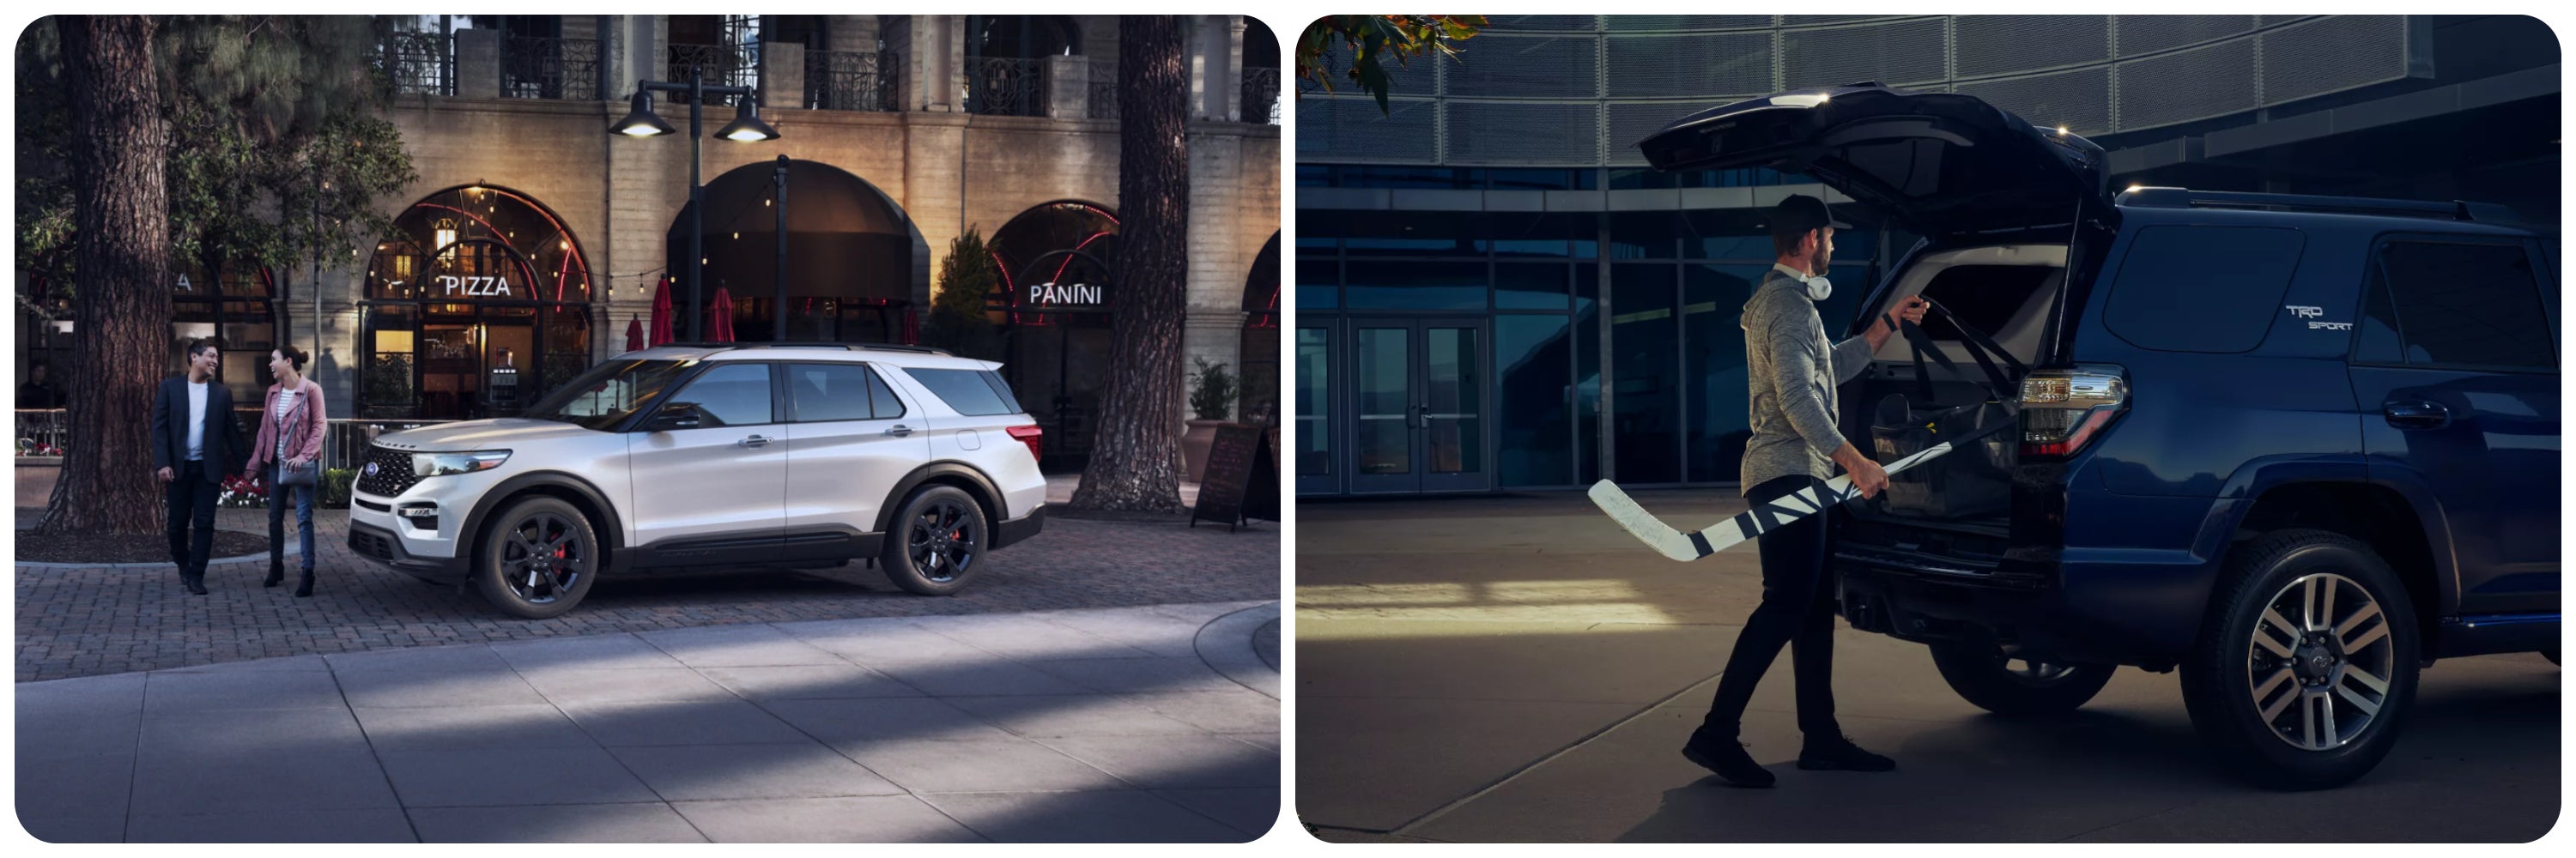 On the left a view of the profile of a white 2022 Ford Explorer as it sits parked on a city street. On the right a man loads equipment into the cargo hold of a green 2022 Toyota 4Runner